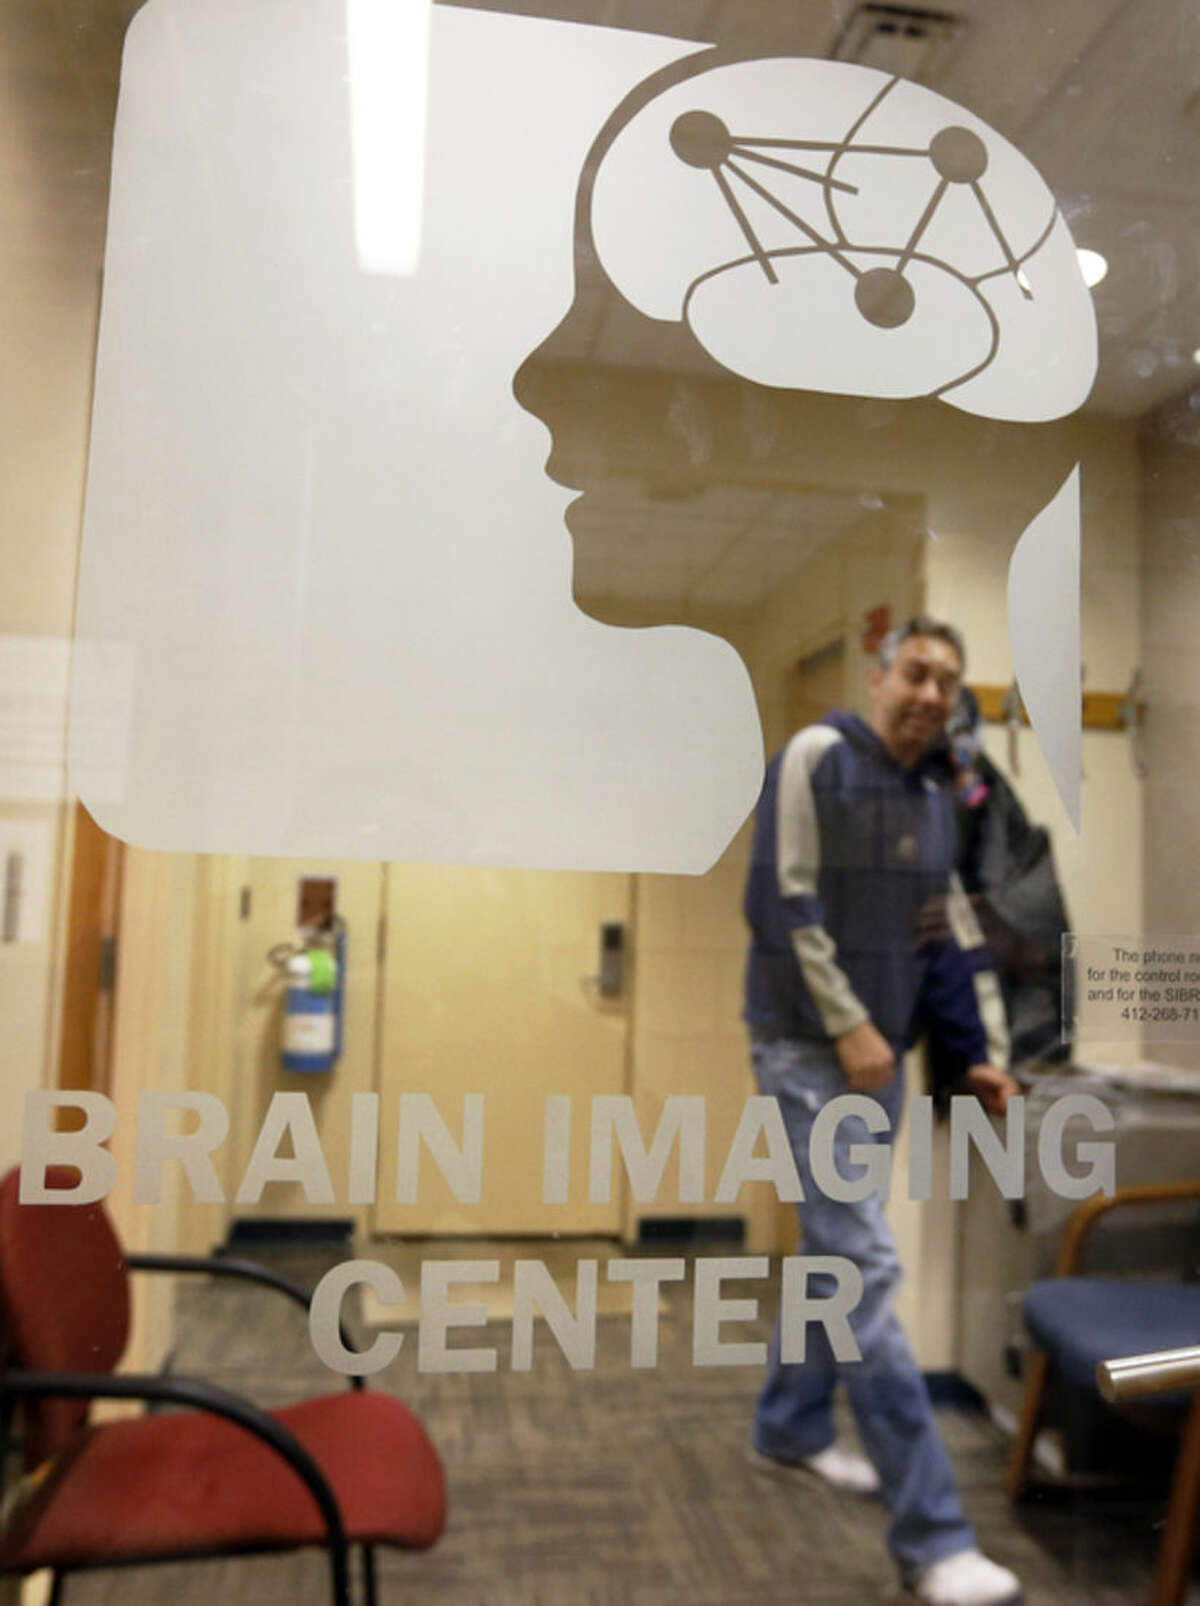 Scott Kurdilla, a medical research technologist at Carnegie Mellon University, waits for a volunteer for a brain scan experiment on campus in Pittsburgh on Wednesday Nov. 26, 2014. The brain-scanning MRI machine at the center was used in a recent experiment where each word of a chapter of "Harry Potter and the Sorcerer's Stone" was flashed for half a second onto a screen inside a brain-scanning MRI machine. Images showing combinations of data and graphics were collected. (AP Photo/Keith Srakocic)